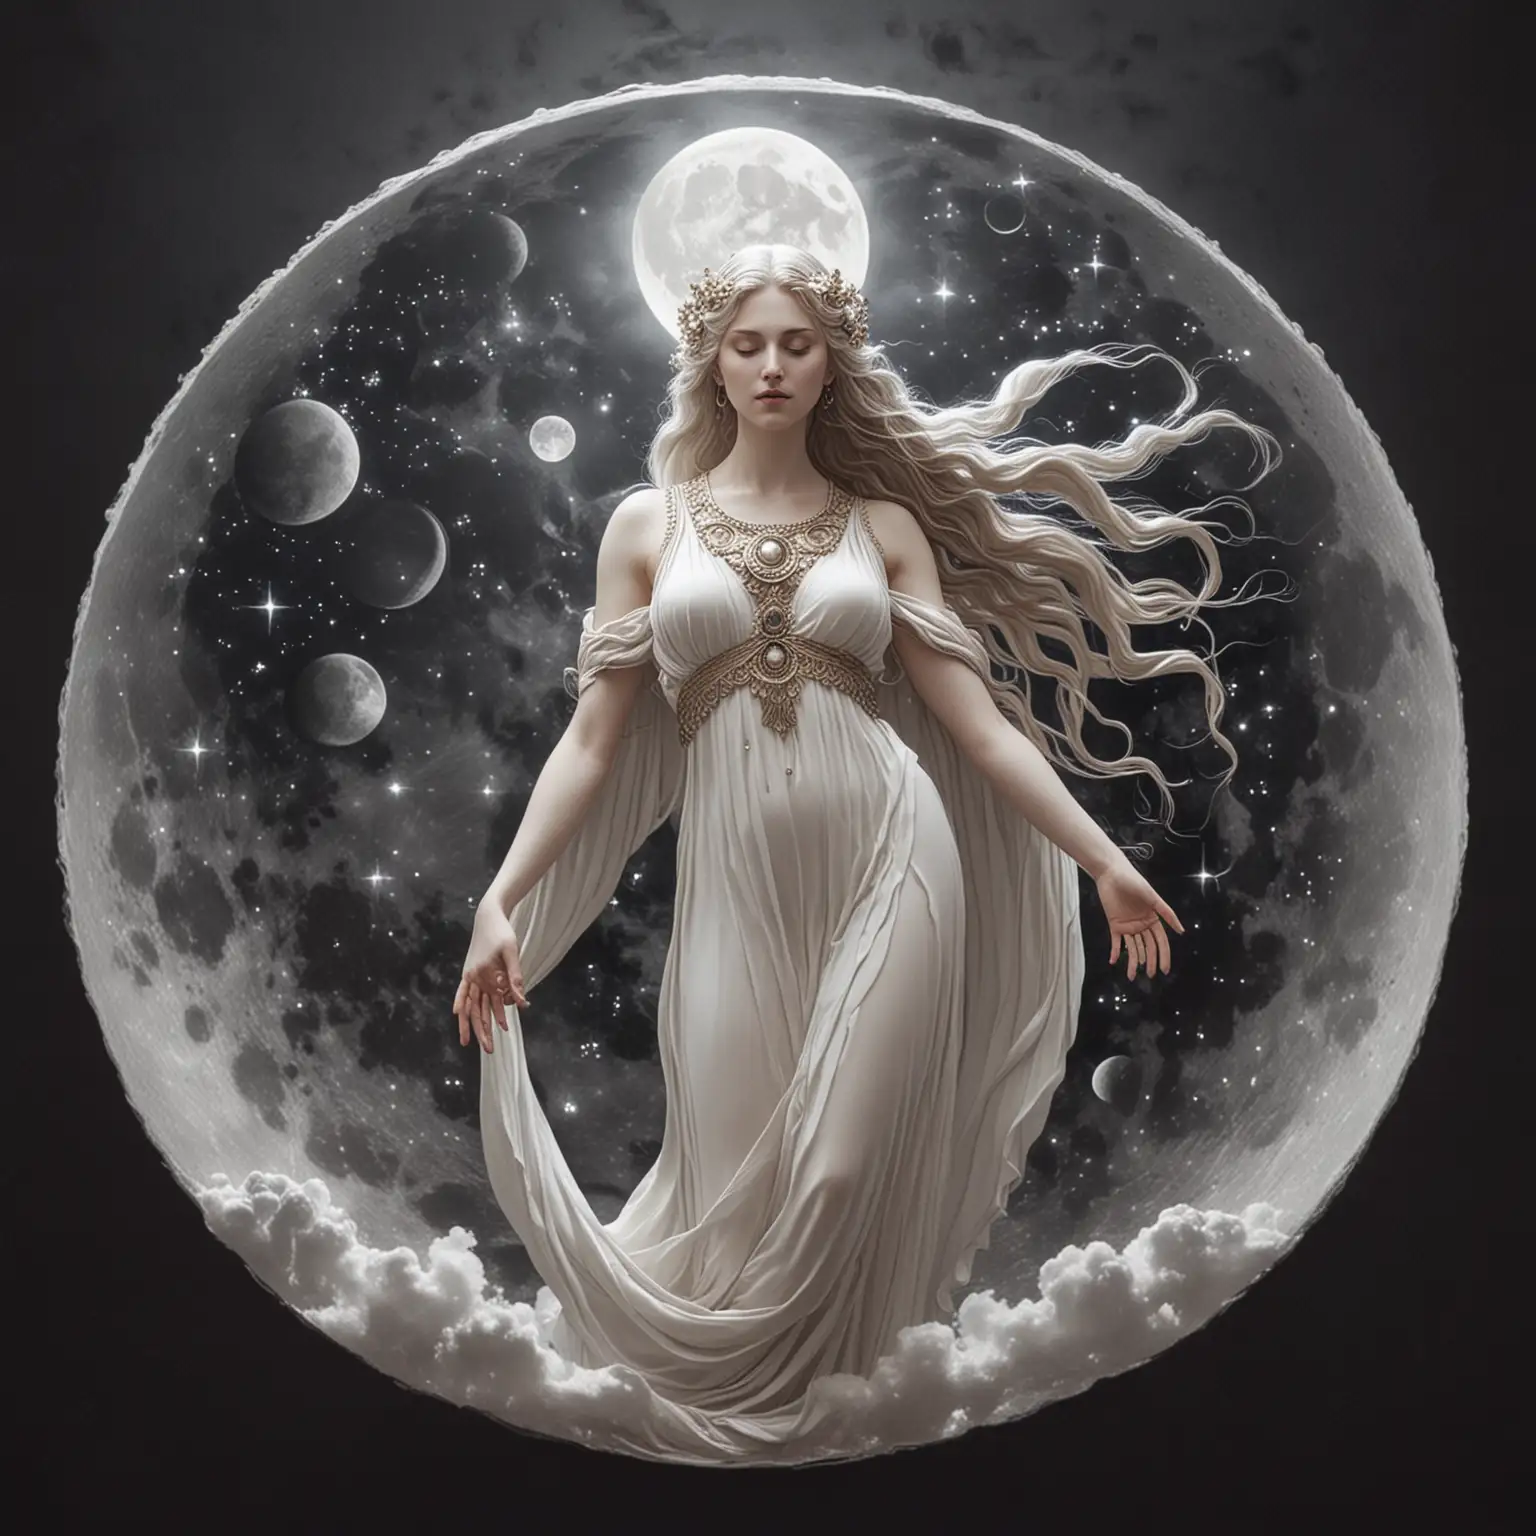 the goddess of the phases of the moon
